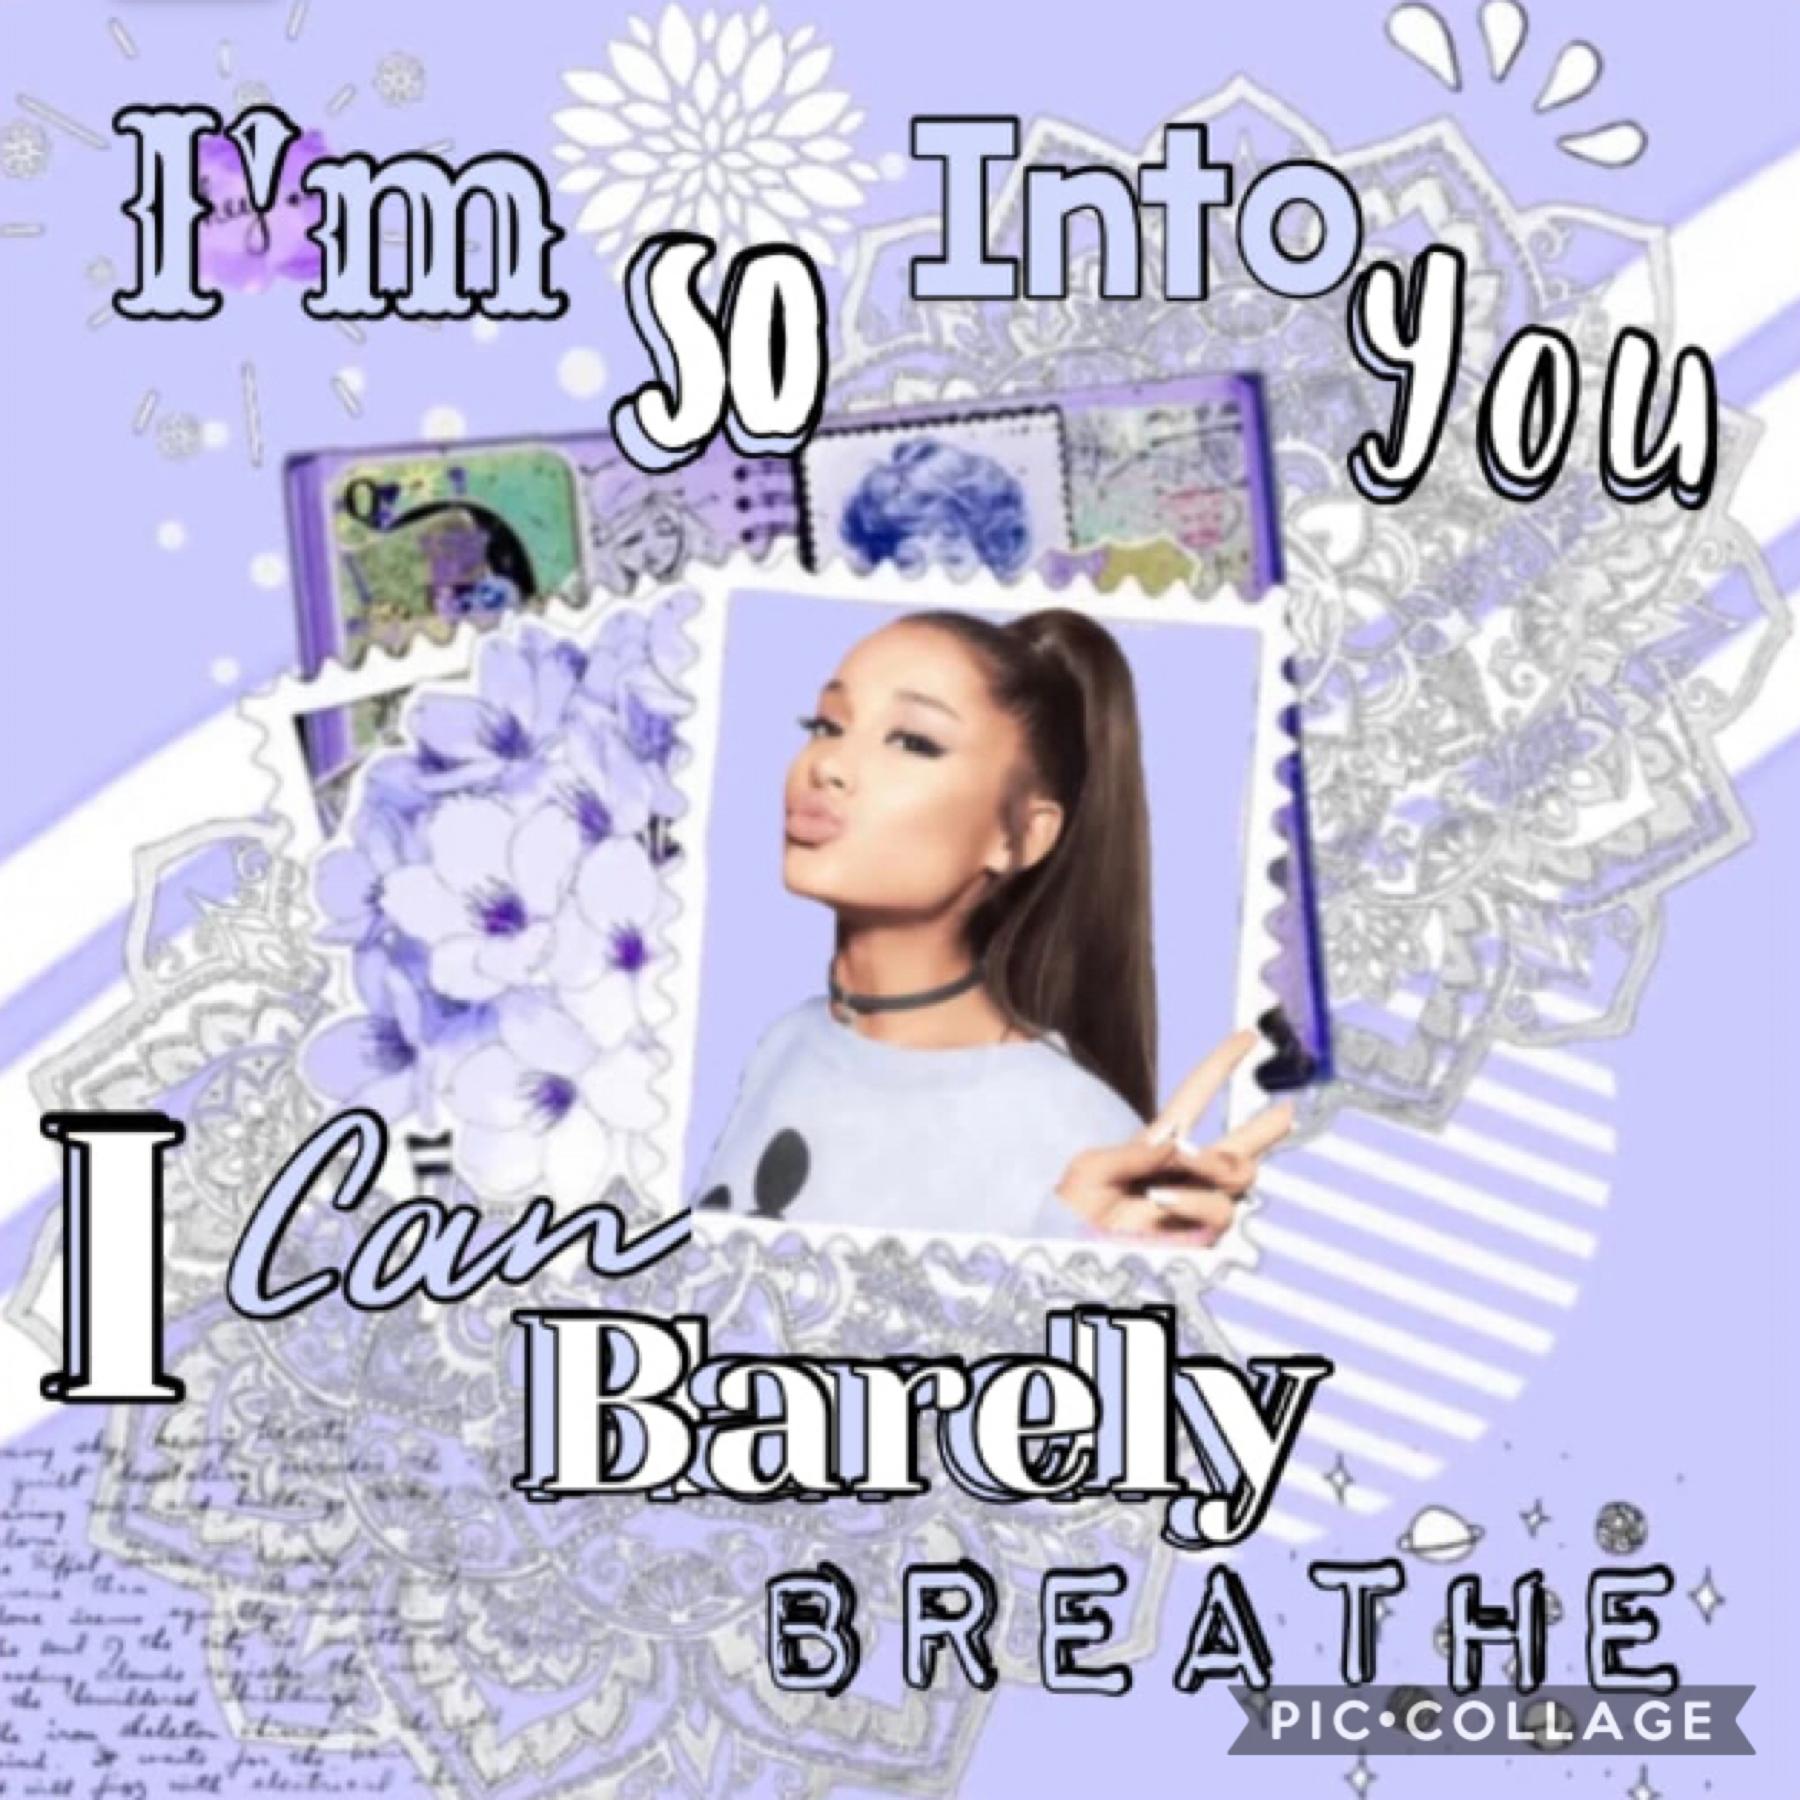 💜tap💜

Collab with my bestie @aesthetic_sunflower2009 GO FOLLOW HER & get her too 500 followers 🖤

I did the bg and she did the wonderful text 💜🖤